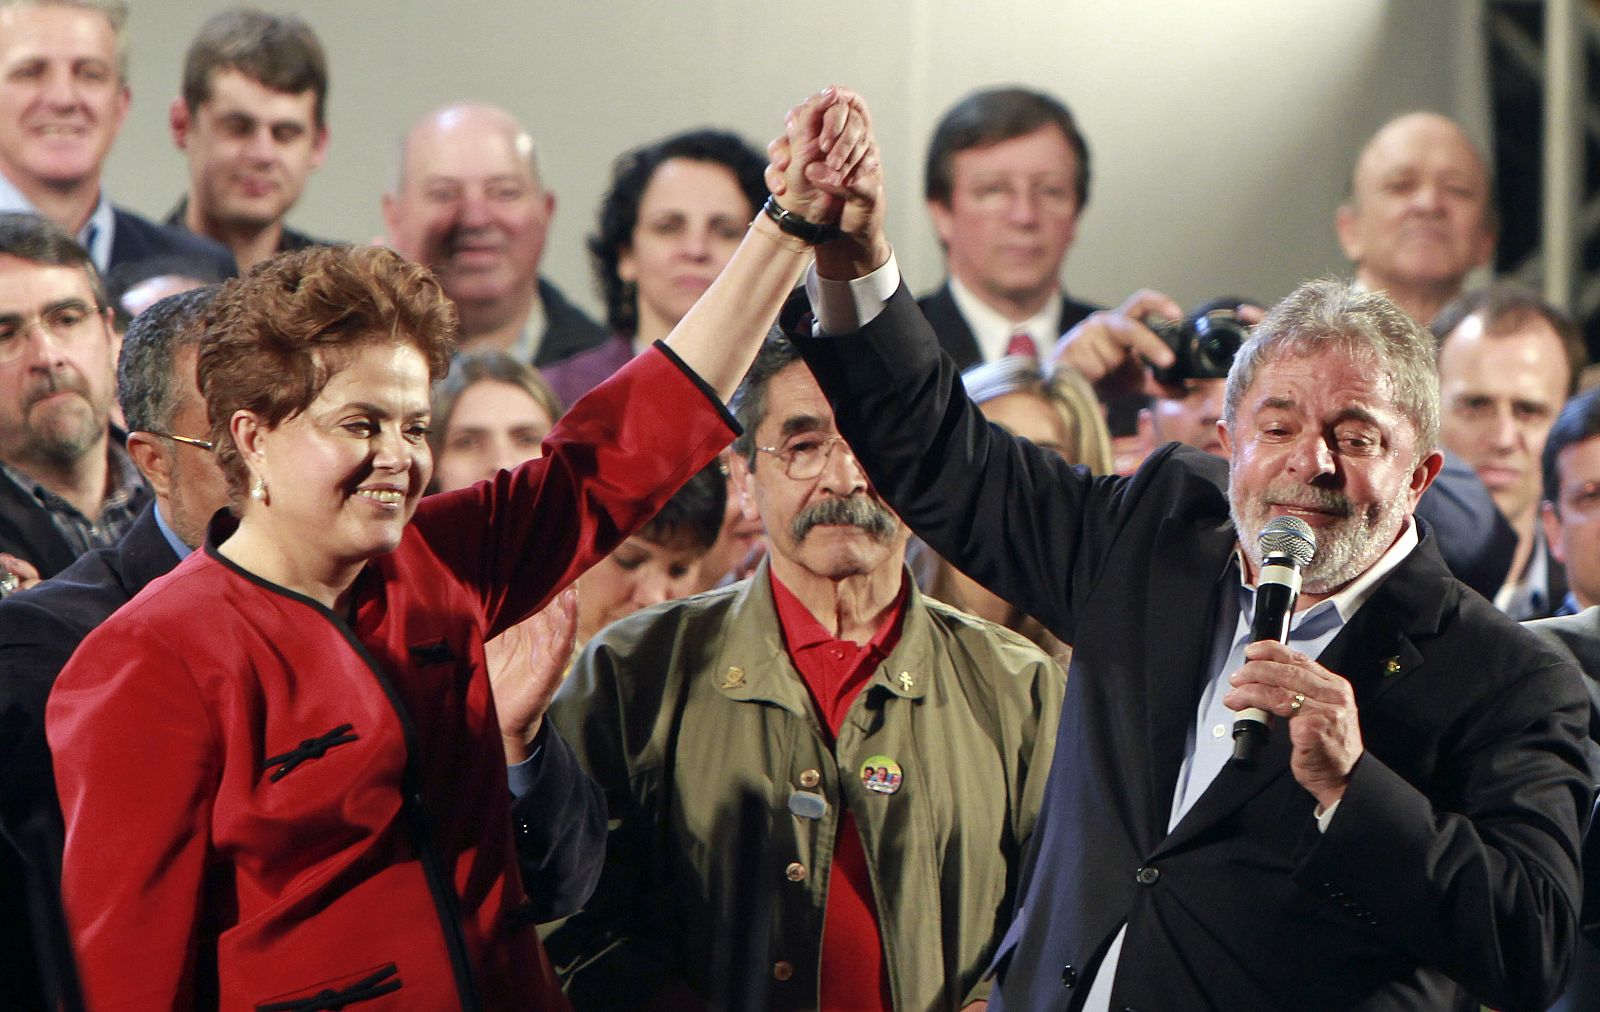 Brazil's President Luiz Inacio Lula da Silva raises the hand of Brazil's ruling Workers' Party presidential candidate Dilma Rousseff during a campaign rally in Porto Alegre